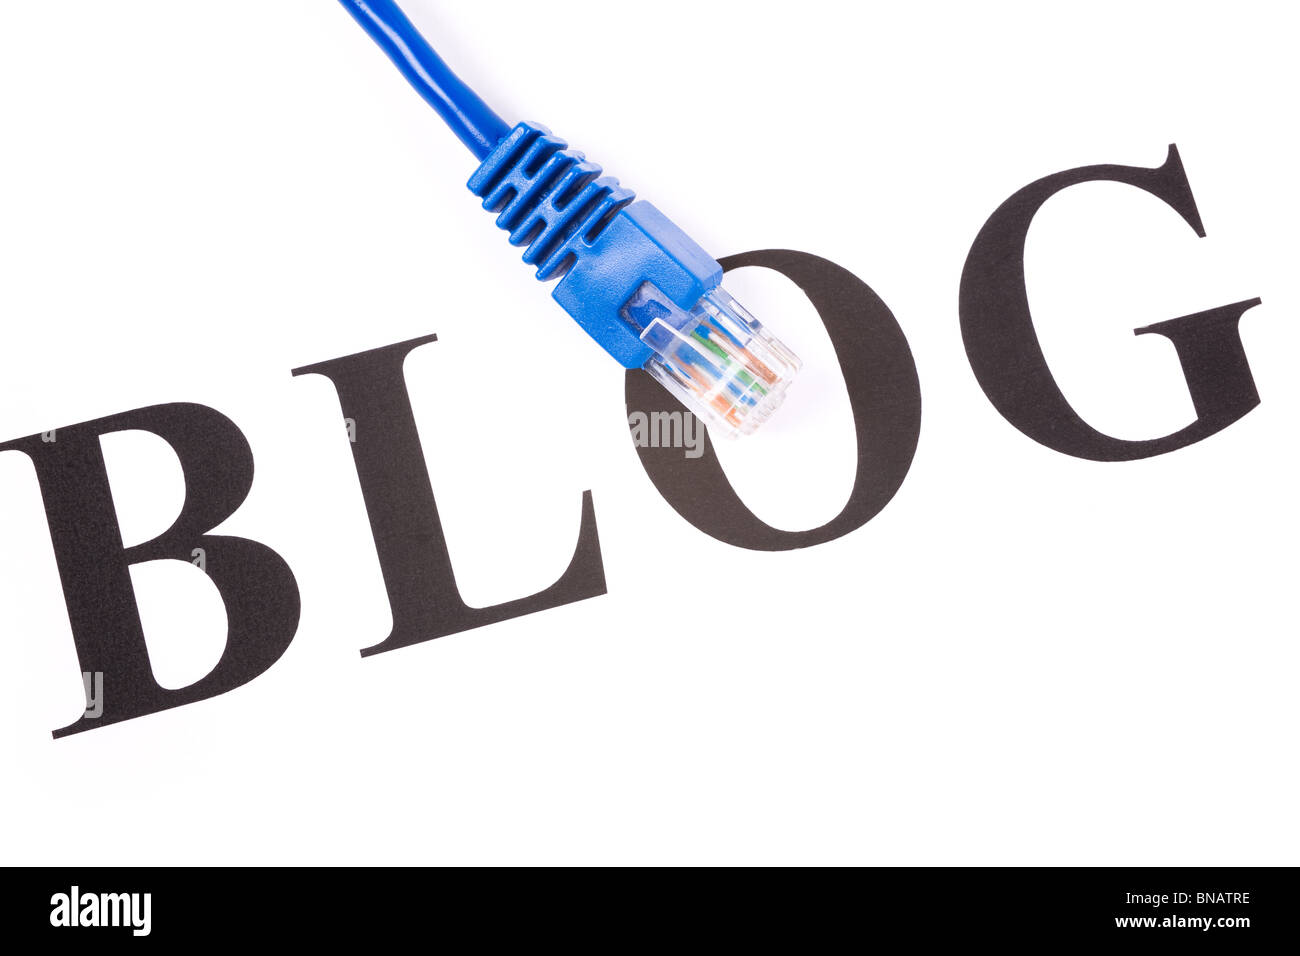 Blog and network cable, internet Diary concept Stock Photo